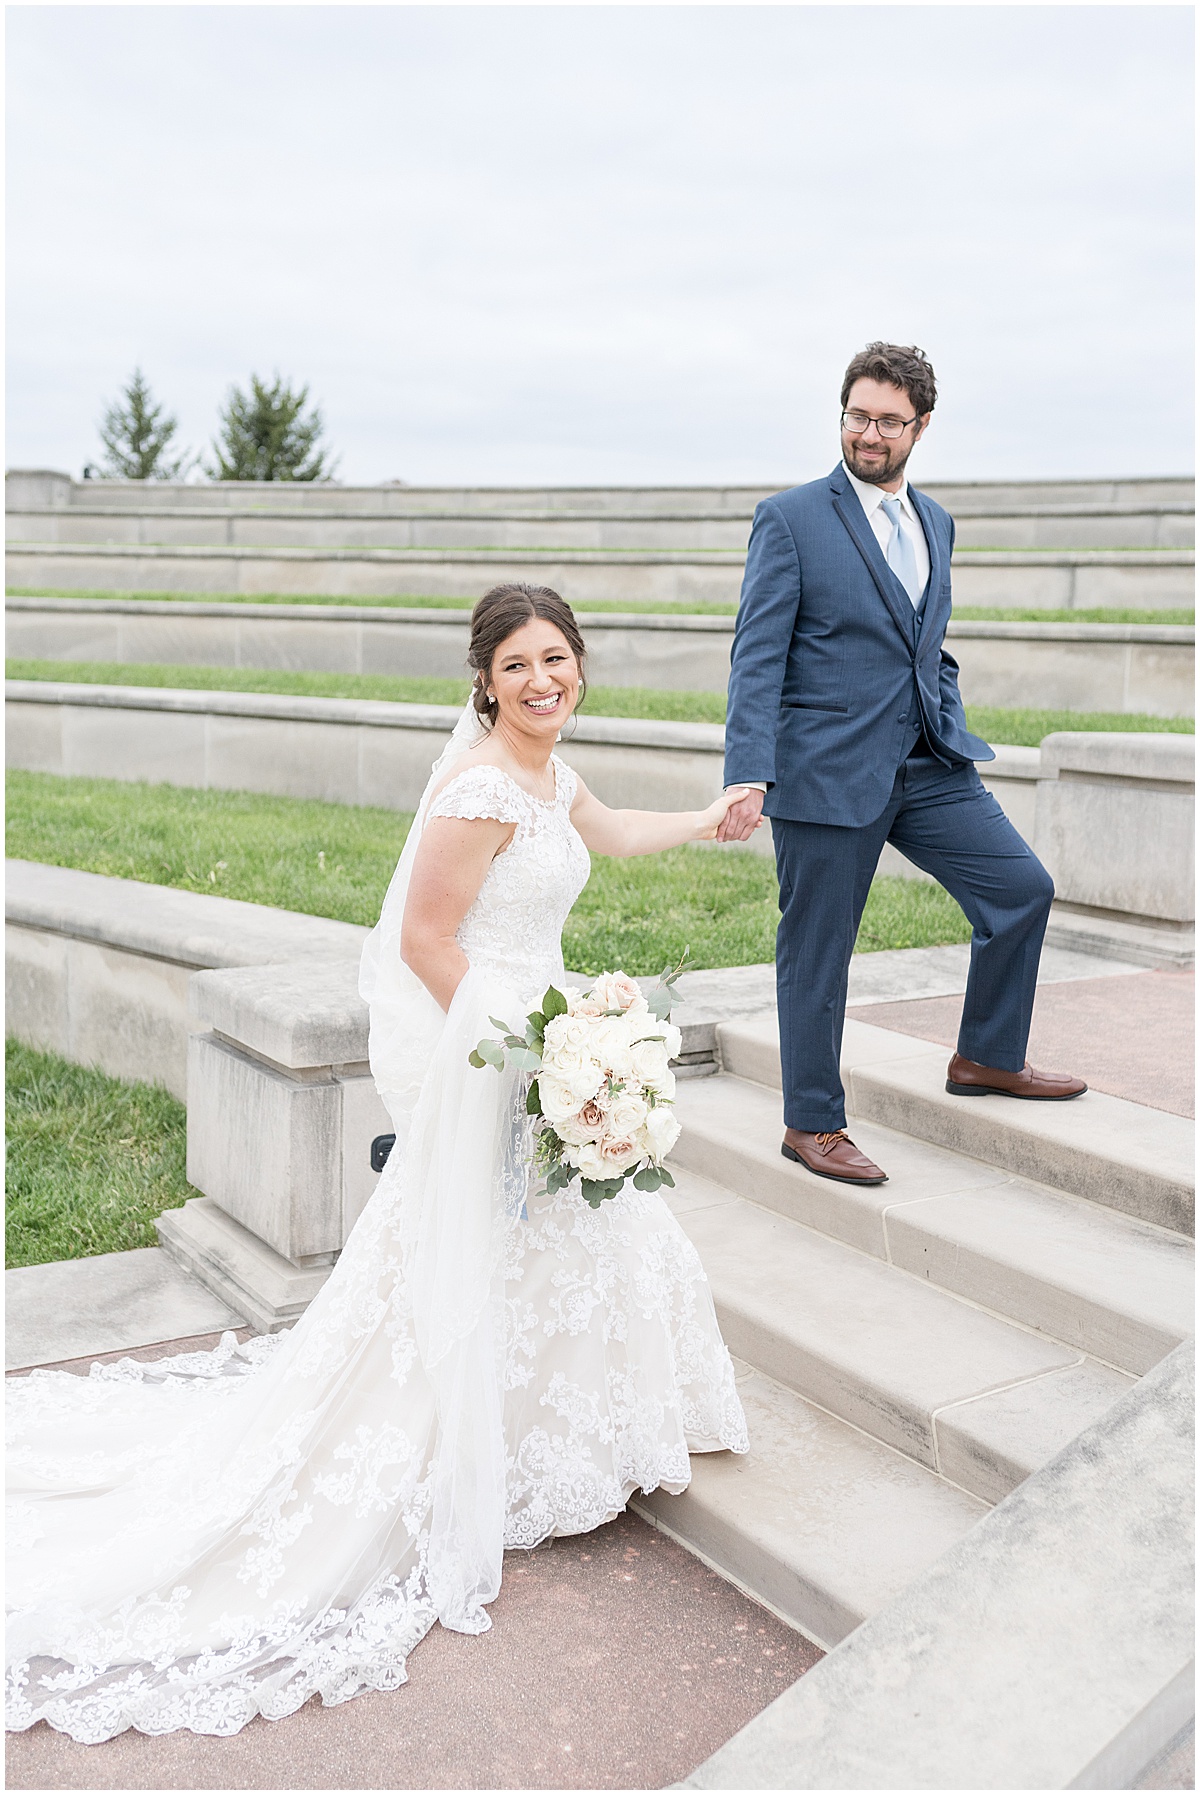 Finley Creek Vineyards wedding in Zionsville, Indiana photographed by Victoria Rayburn Photography